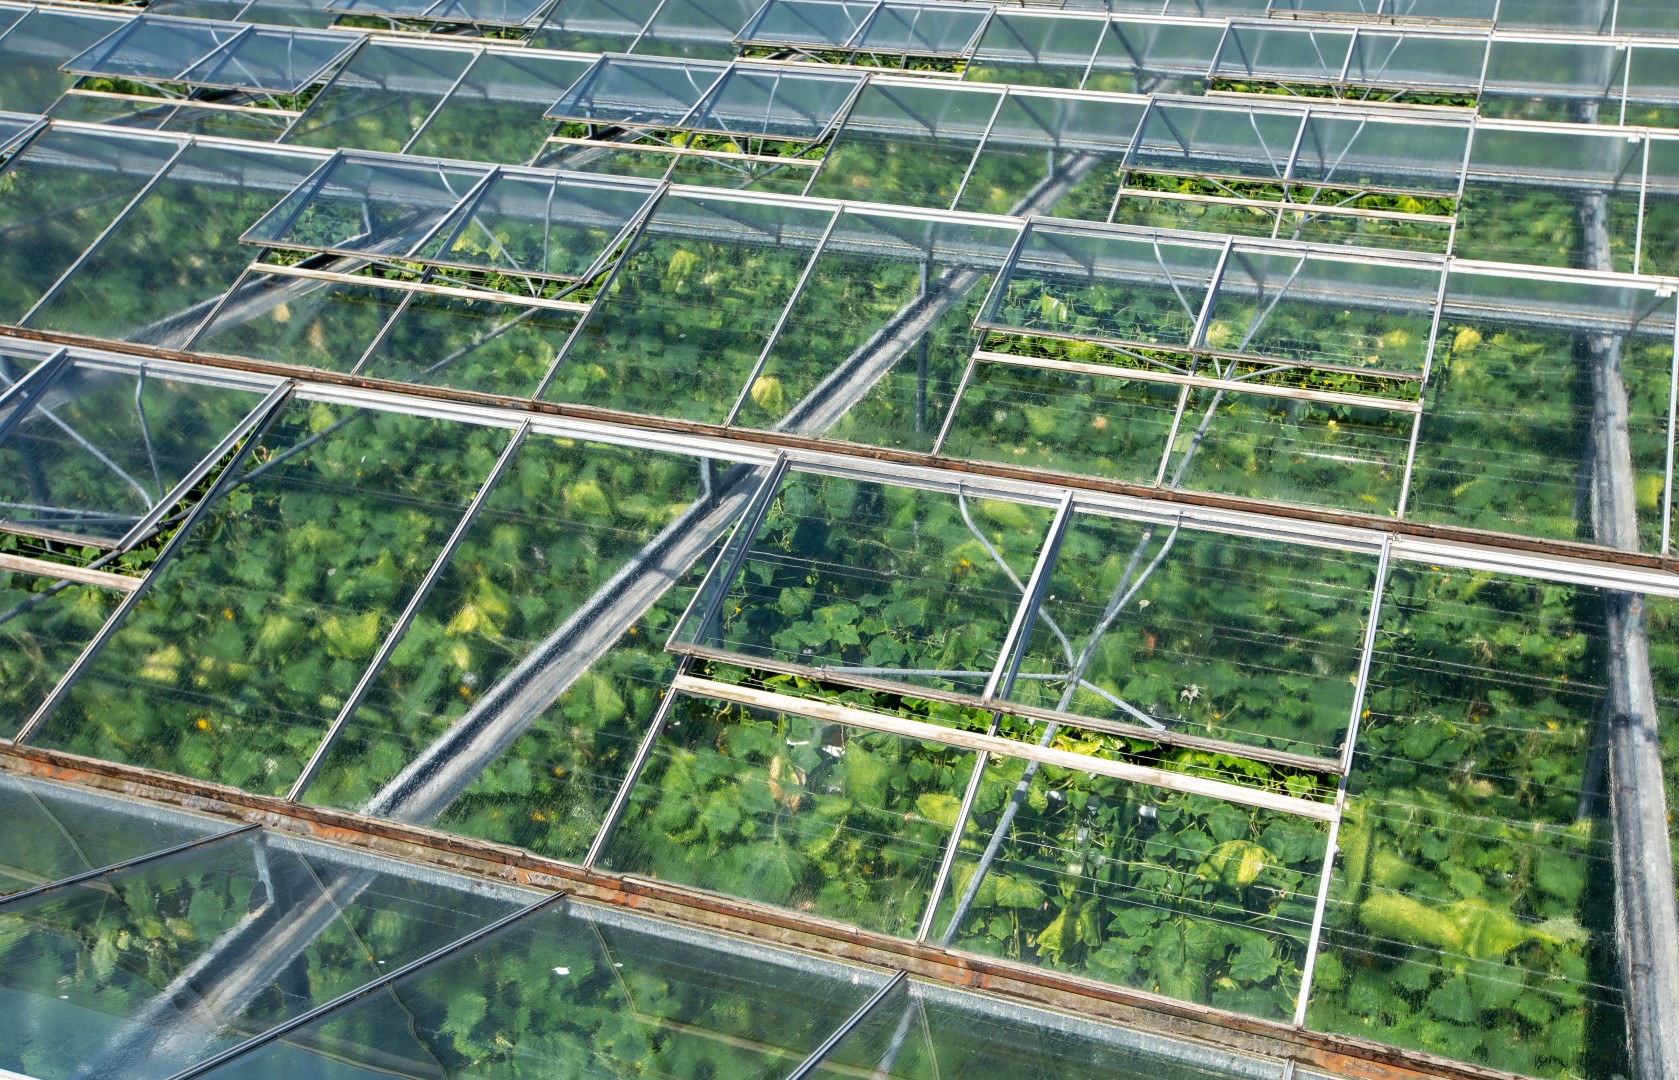 Glasshouse roof over mature cucumber crops with vents open. Courtesy of Gary Naylor.